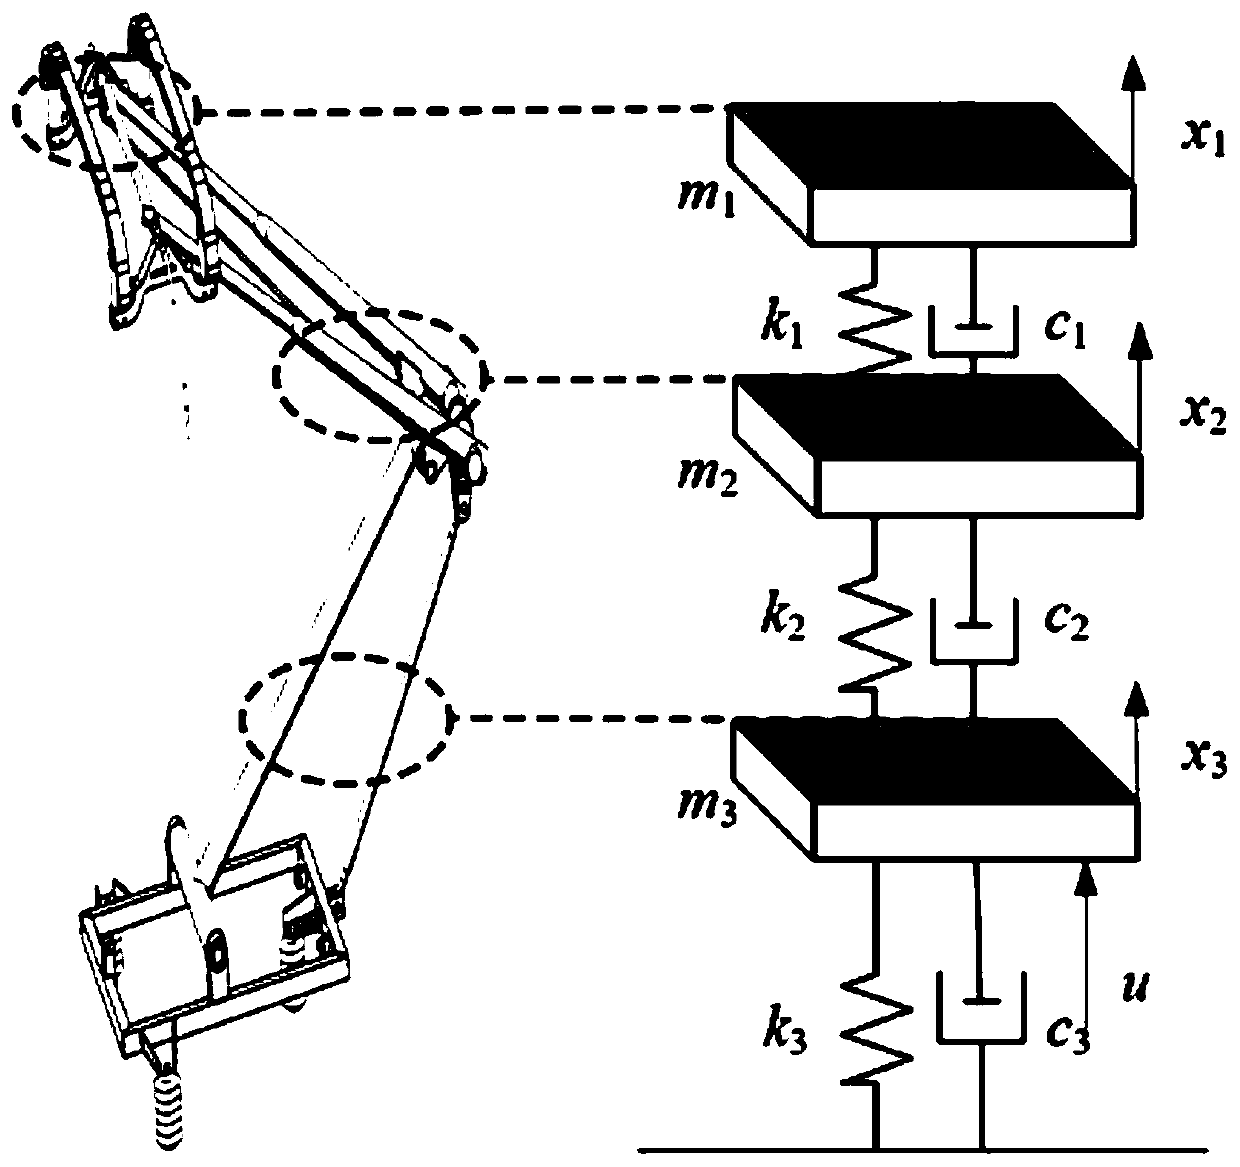 Multi-objective robust control method for high-speed railway pantograph type current collector based on state estimation